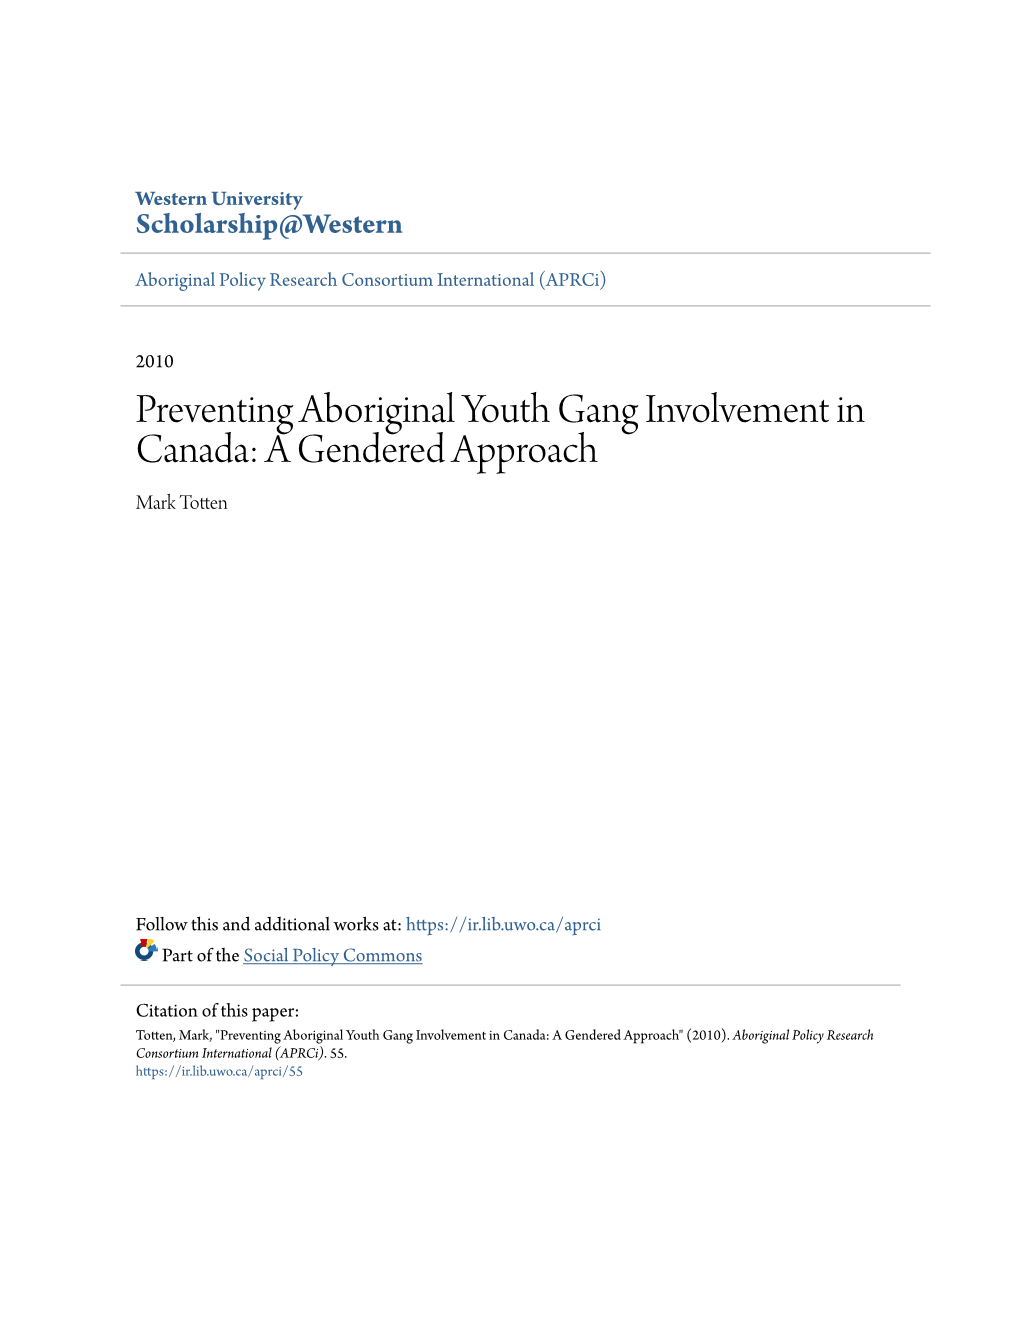 Preventing Aboriginal Youth Gang Involvement in Canada: a Gendered Approach Mark Totten